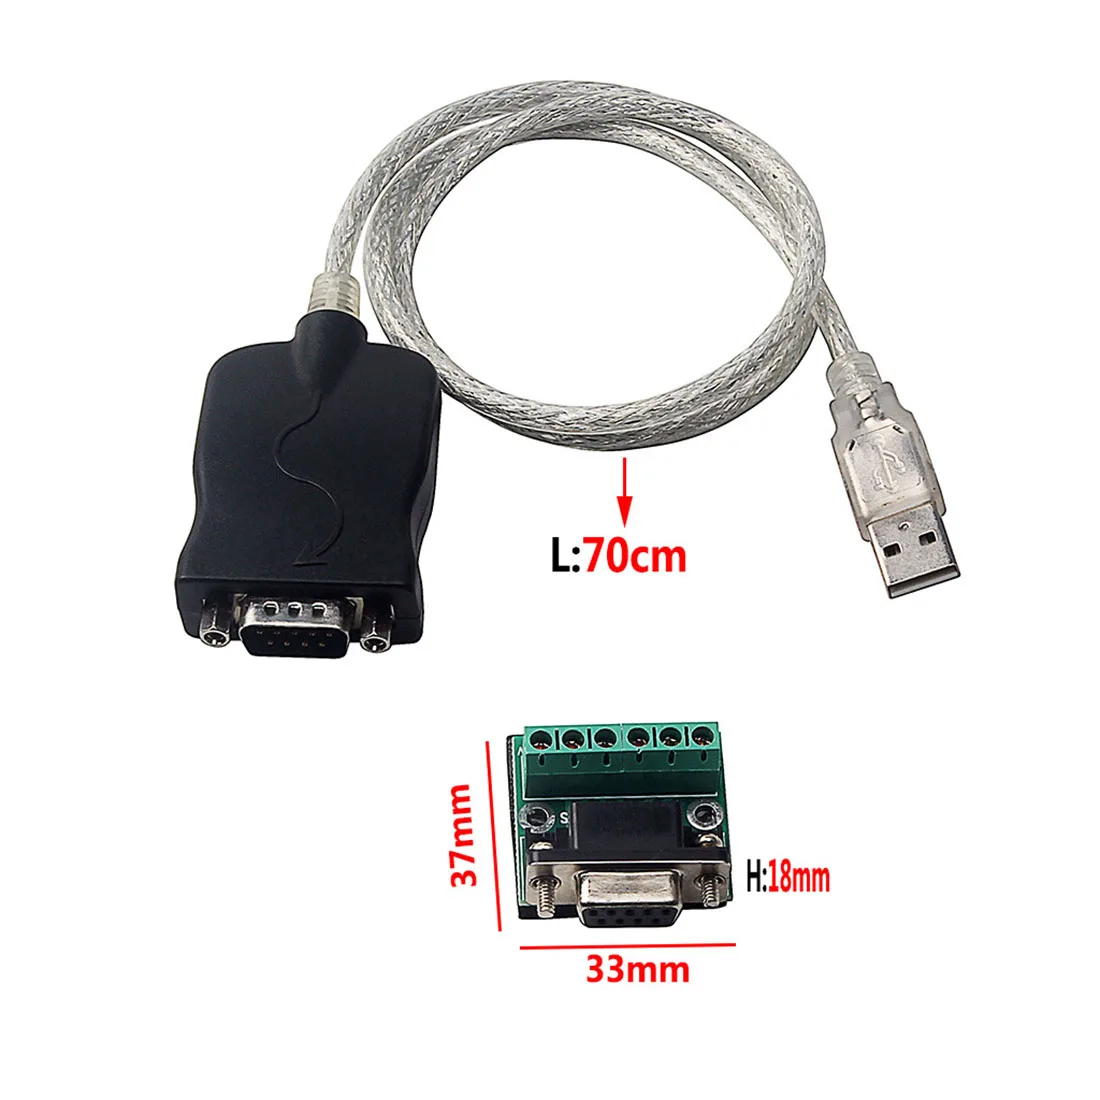 

USB 2.0 to RS485 RS-485 DB9 COM Serial Port Device Converter Adapter Cable High Speed PL2303 USB2.0 5Mbp Cord 70cm Dropship